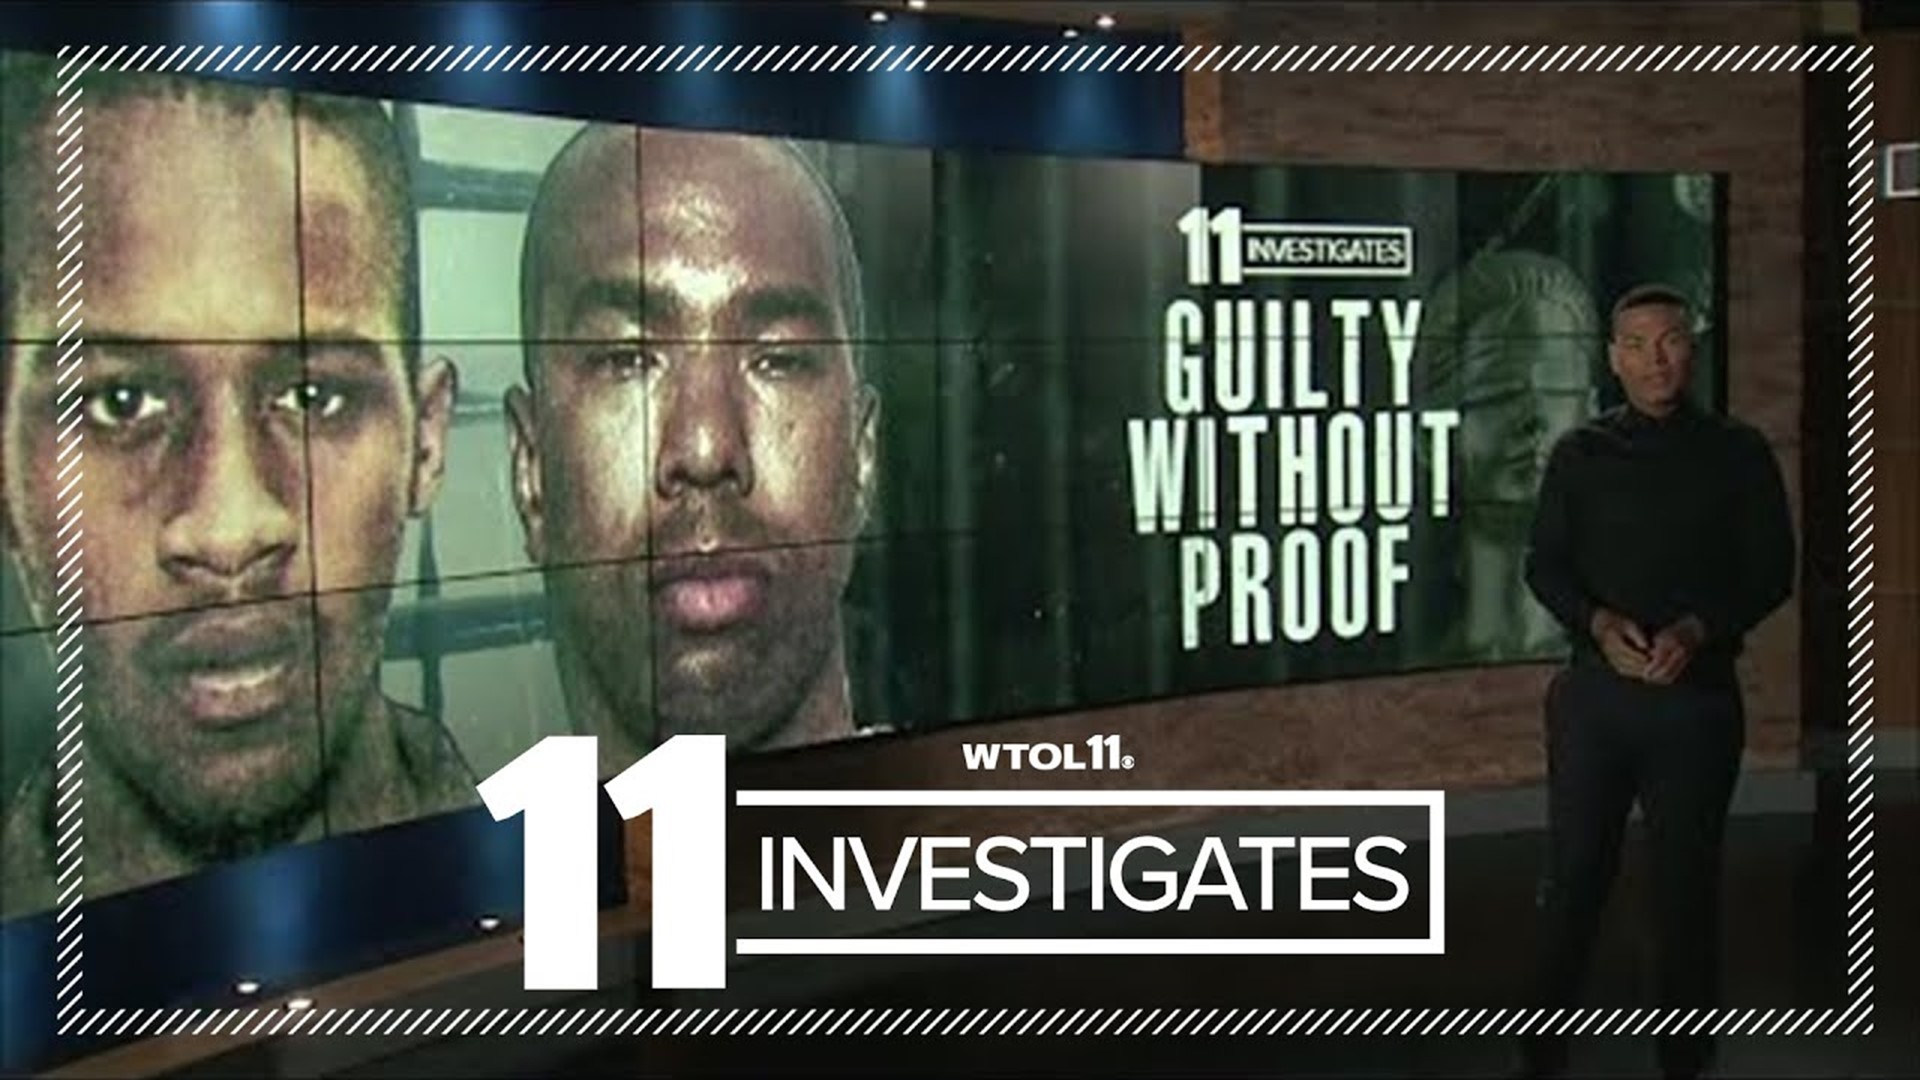 This is the full, half-hour program 11 Investigates: Guilty Without Proof, which looks into the murder case of 13-year-old Maurice Purifie, and the 2 men behind bars who, for 20 years, continue to say they had nothing to do with it.